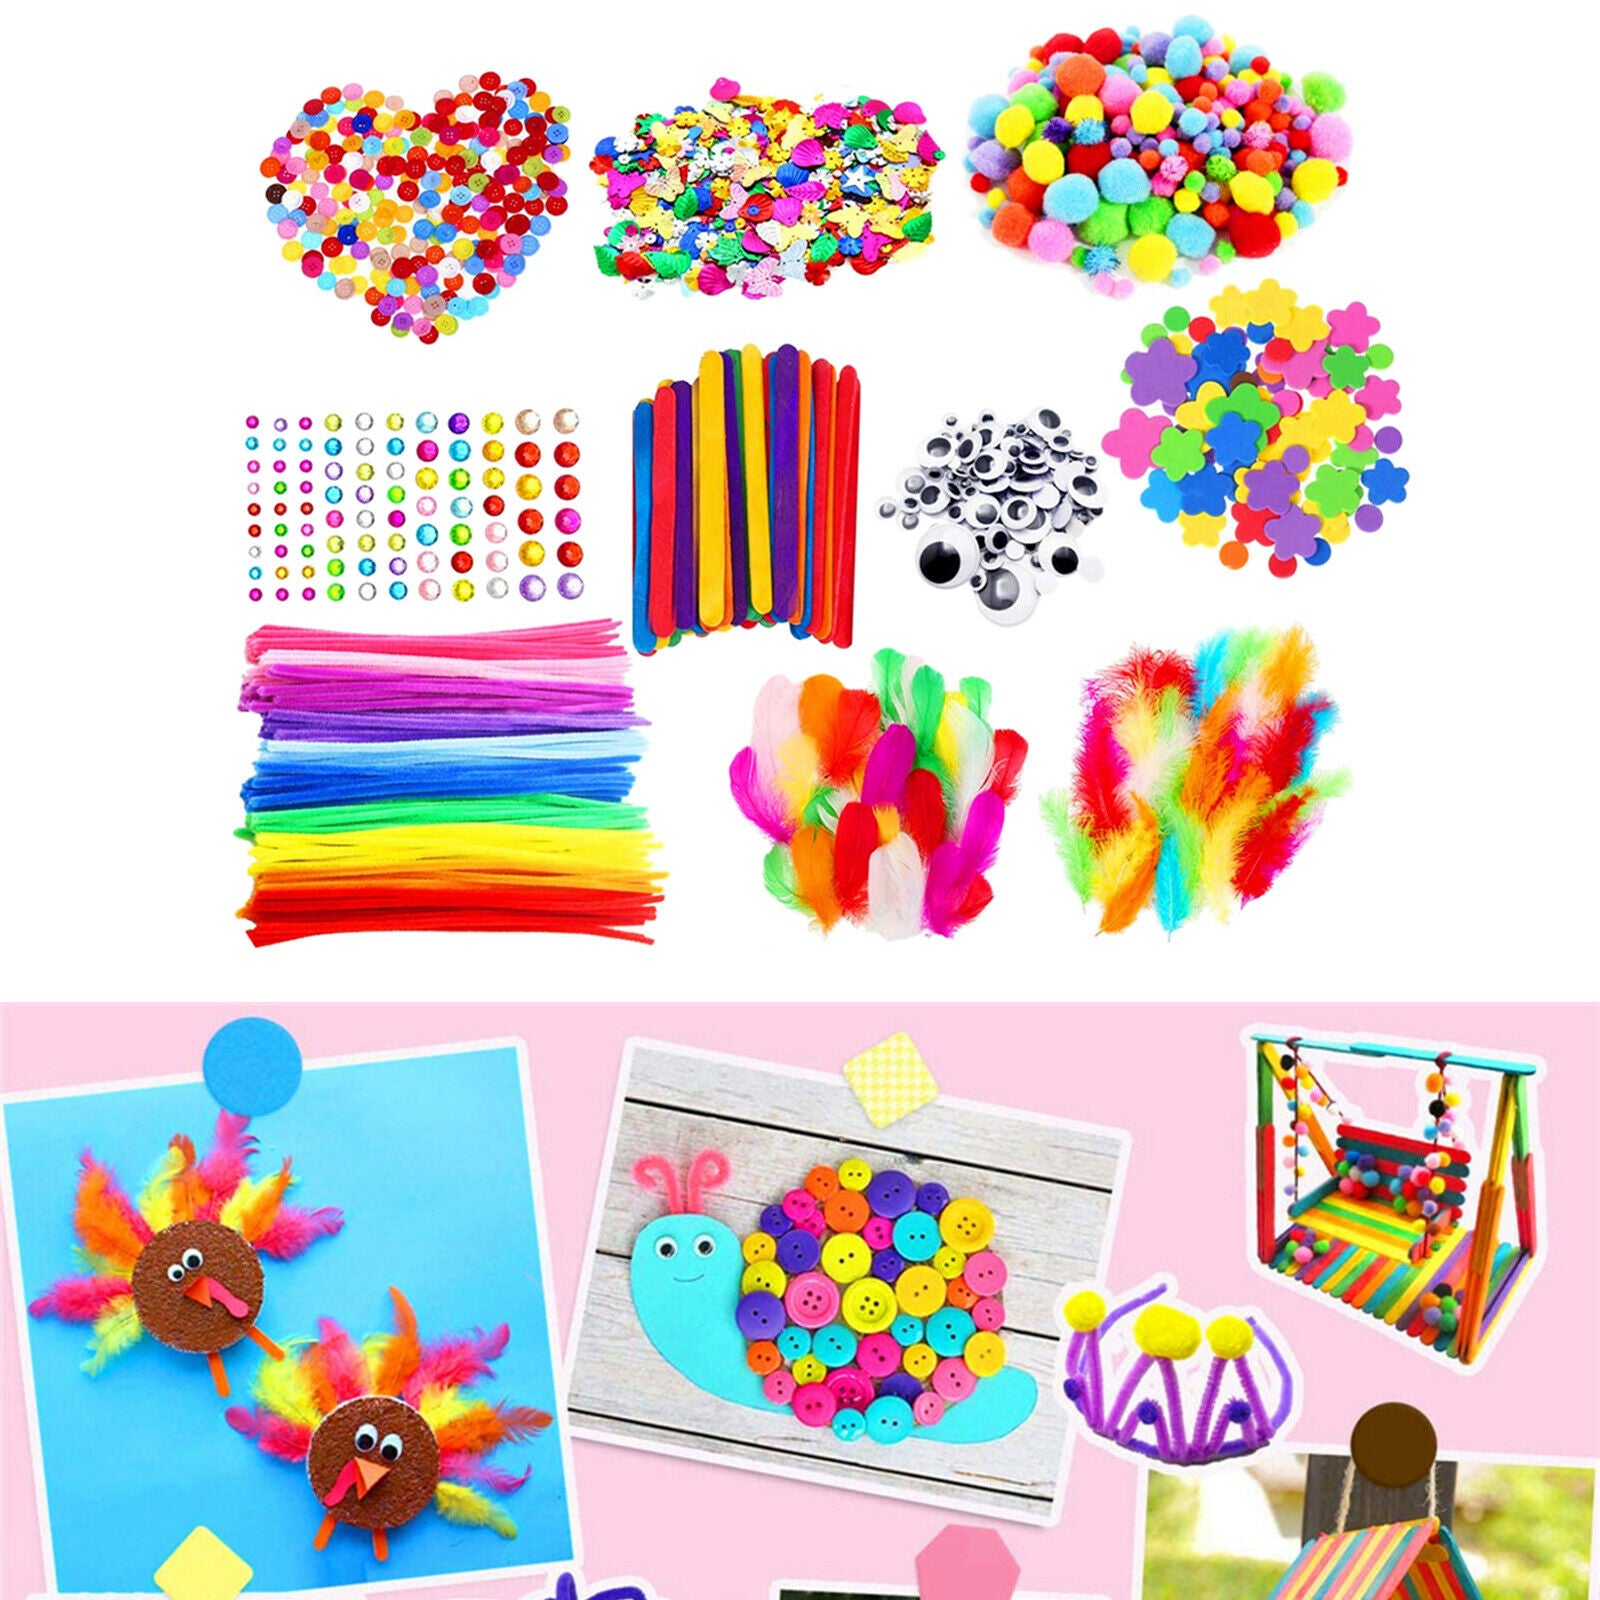 All in One Kids Arts & Crafts Supplies Kit DIY Crafting Collage Material Set